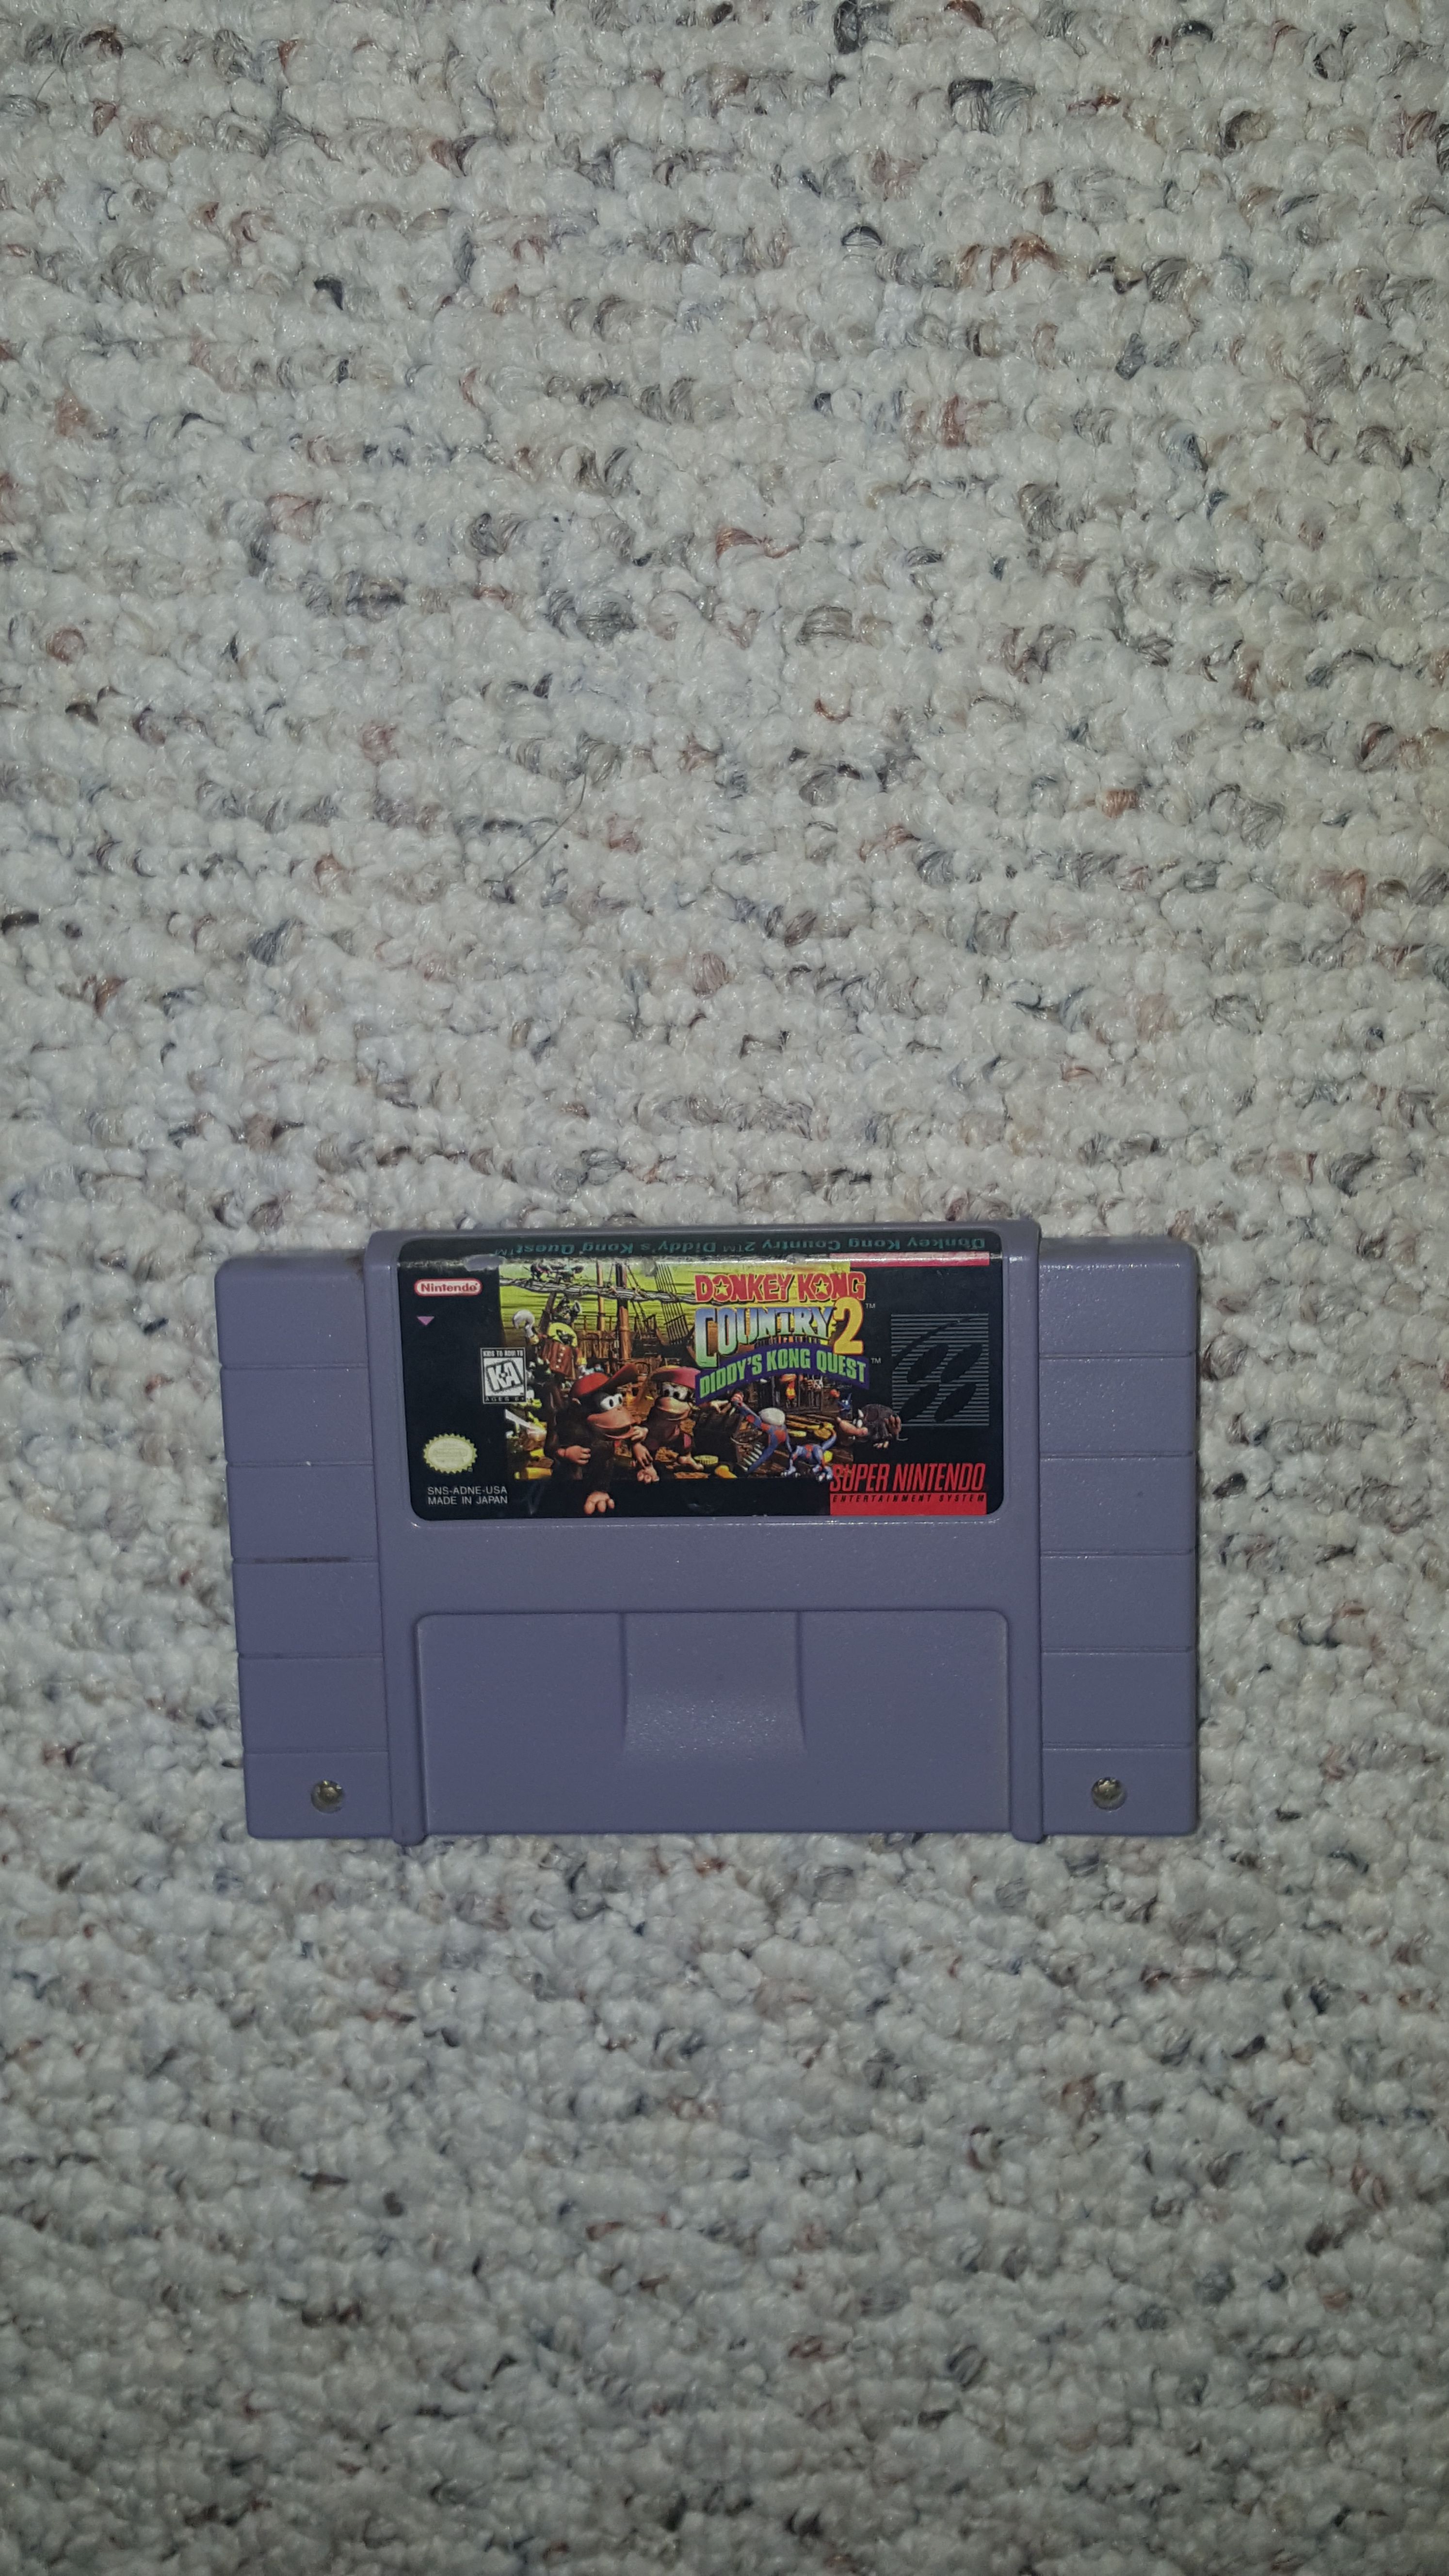 Nintendo GAME SNES - DONKEY KONG COUNTRY 2